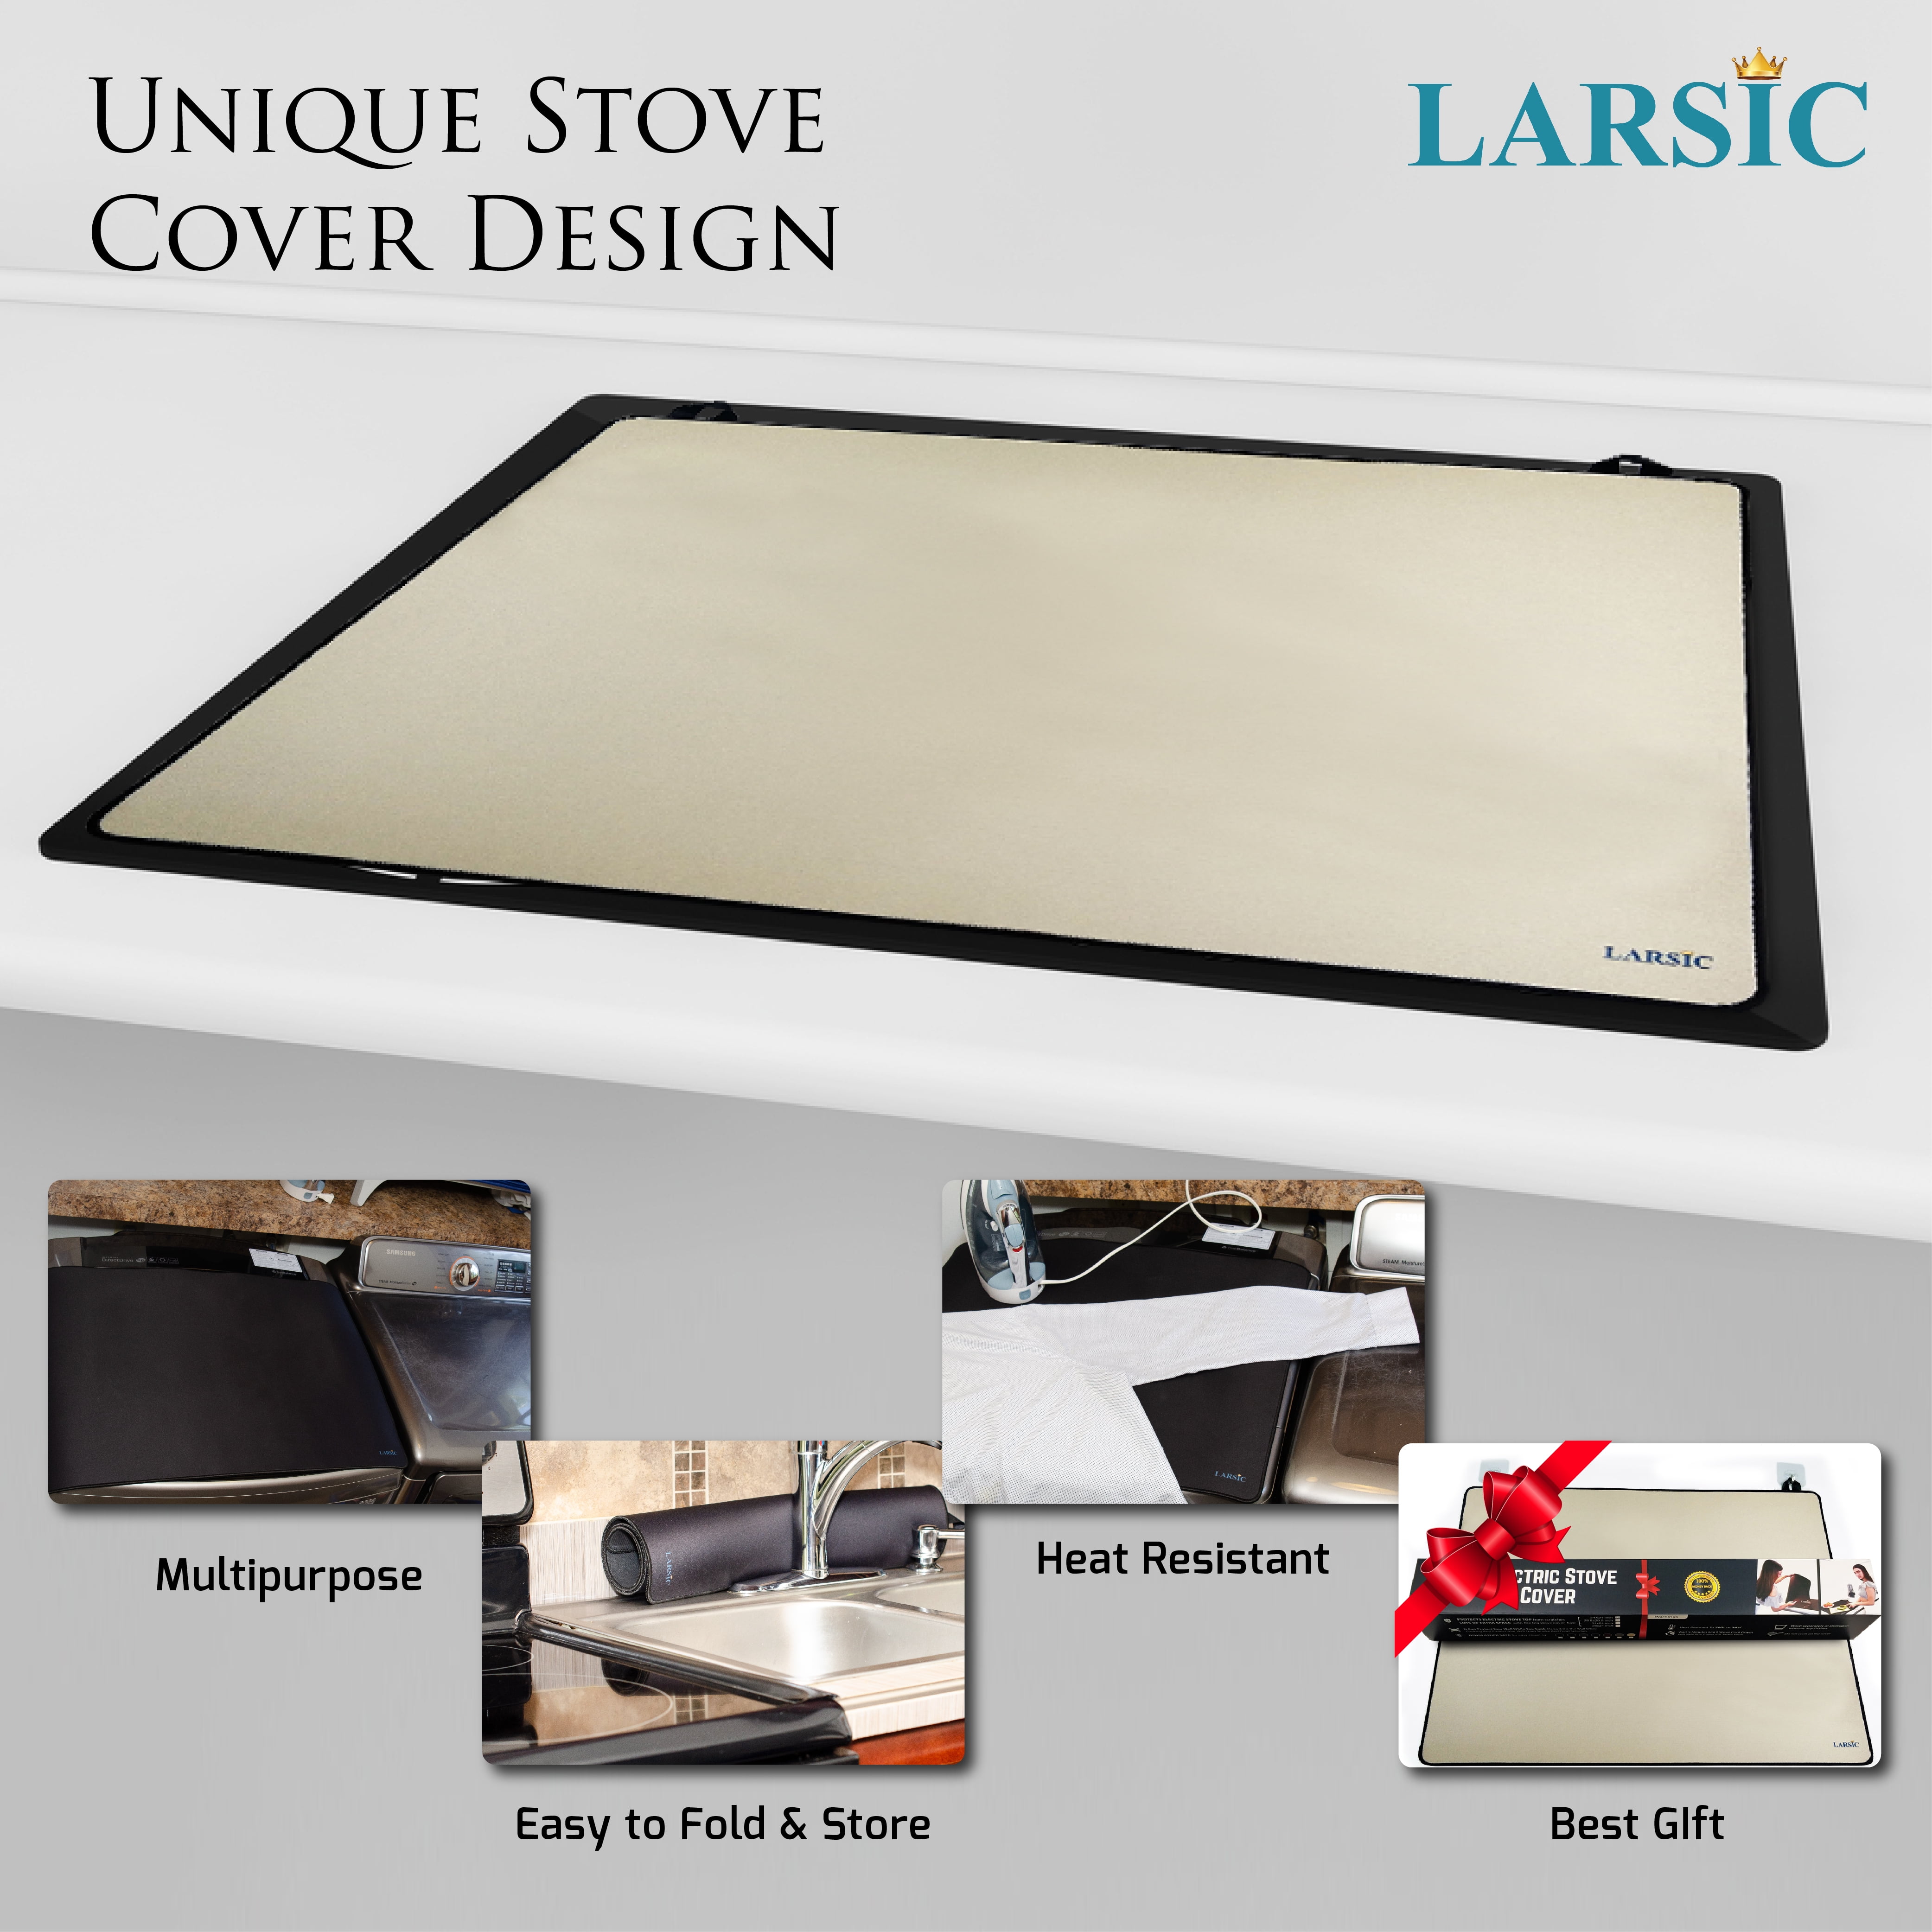 Larsic Stove Cover - Double Thickness Protects Electric Stove Washer Dryer  Top. Anti-Slip Coating Waterproof Stove Gap Foldable Prevent Scratching  (28.5X20.5 DL, Black)